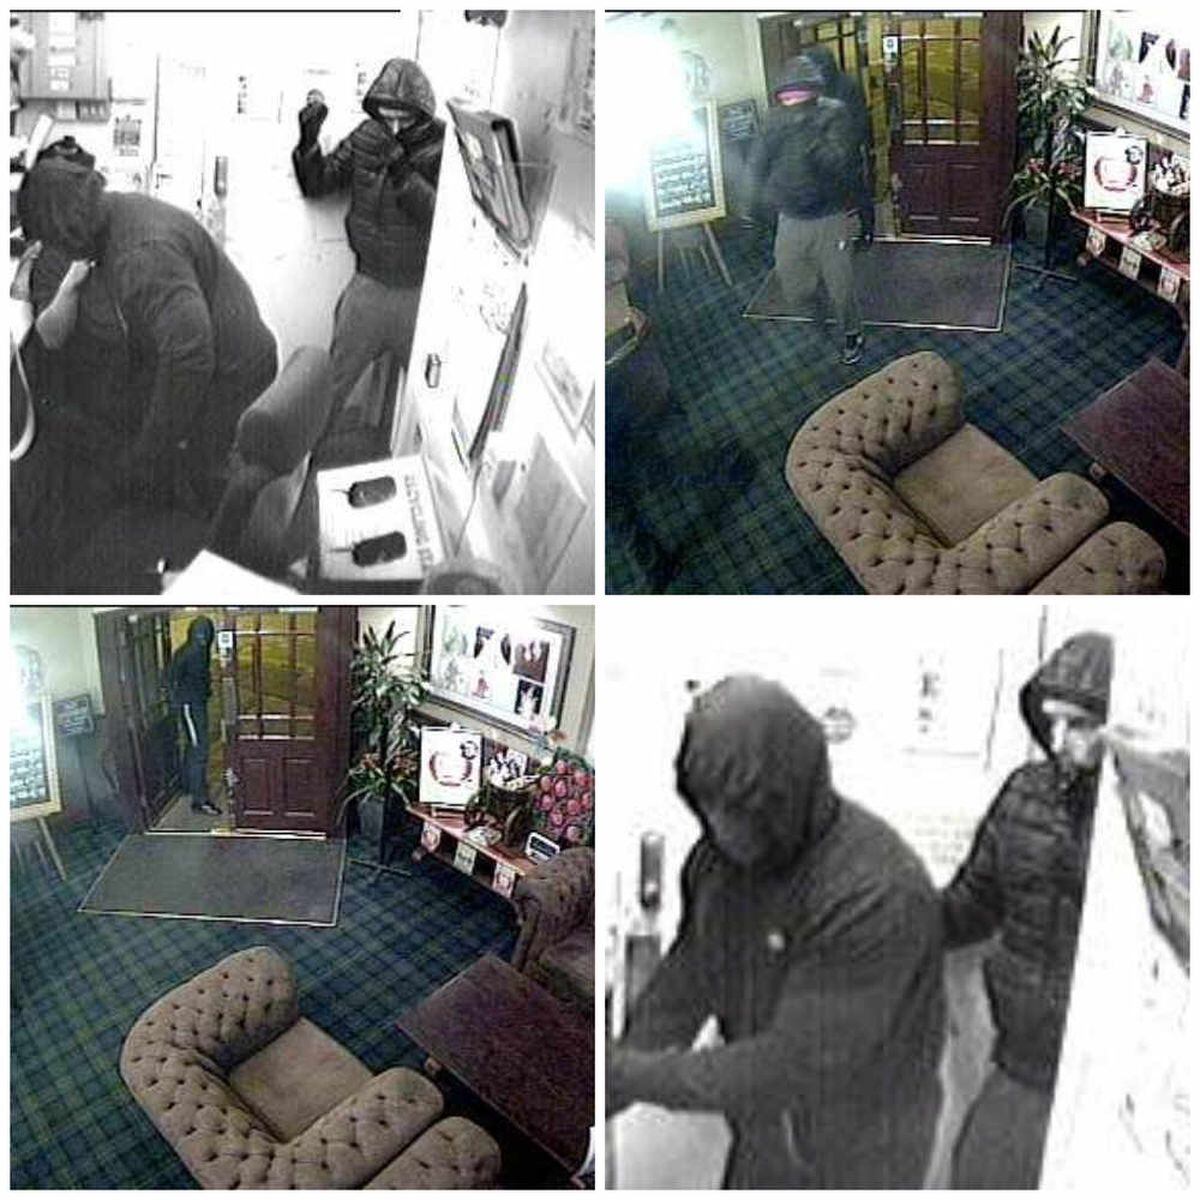 Armed Robbery Caught On Camera In Rowley Regis Pub Express And Star 4981